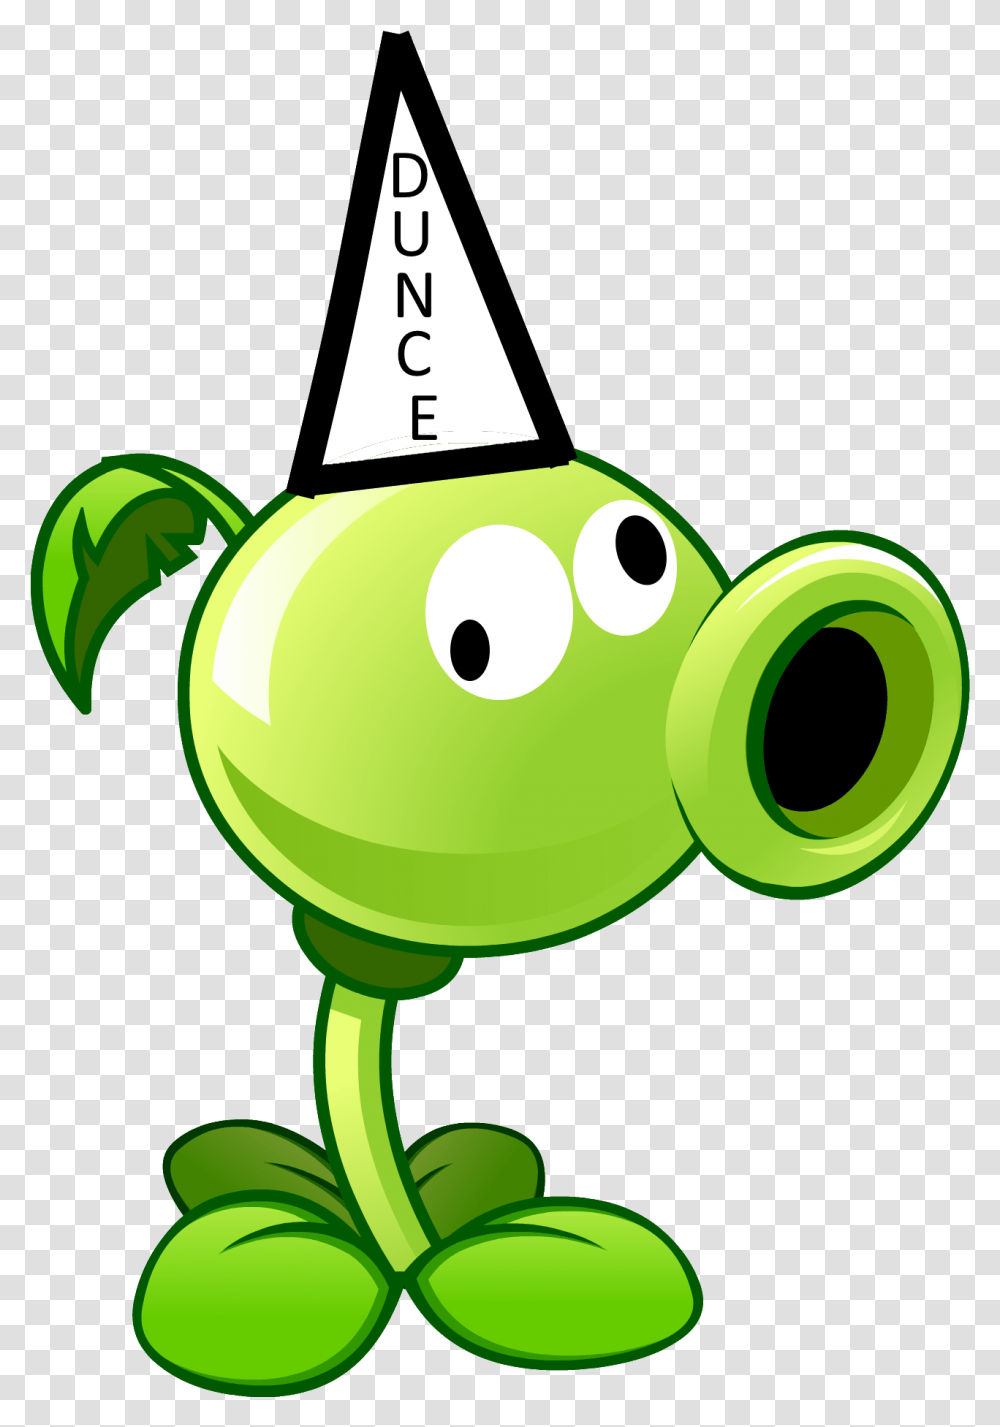 Character Plants Vs Zombies Download Pea Plants Vs Zombies, Green, Animal, Amphibian, Wildlife Transparent Png